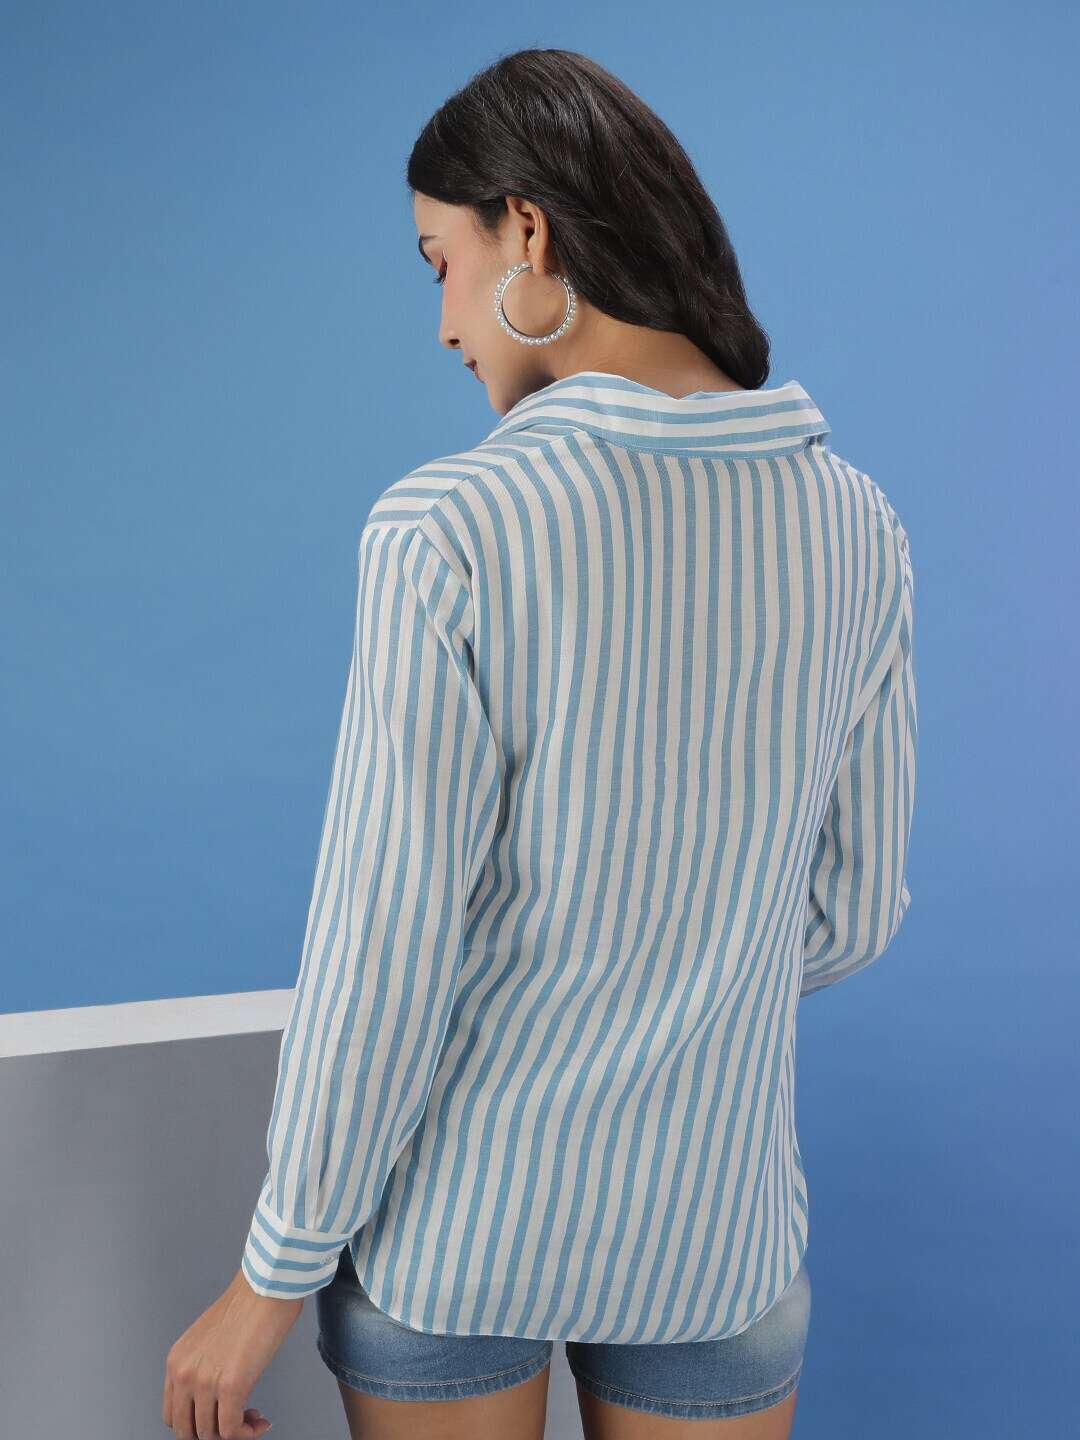 Women Striped Shirt With Front Tie Up